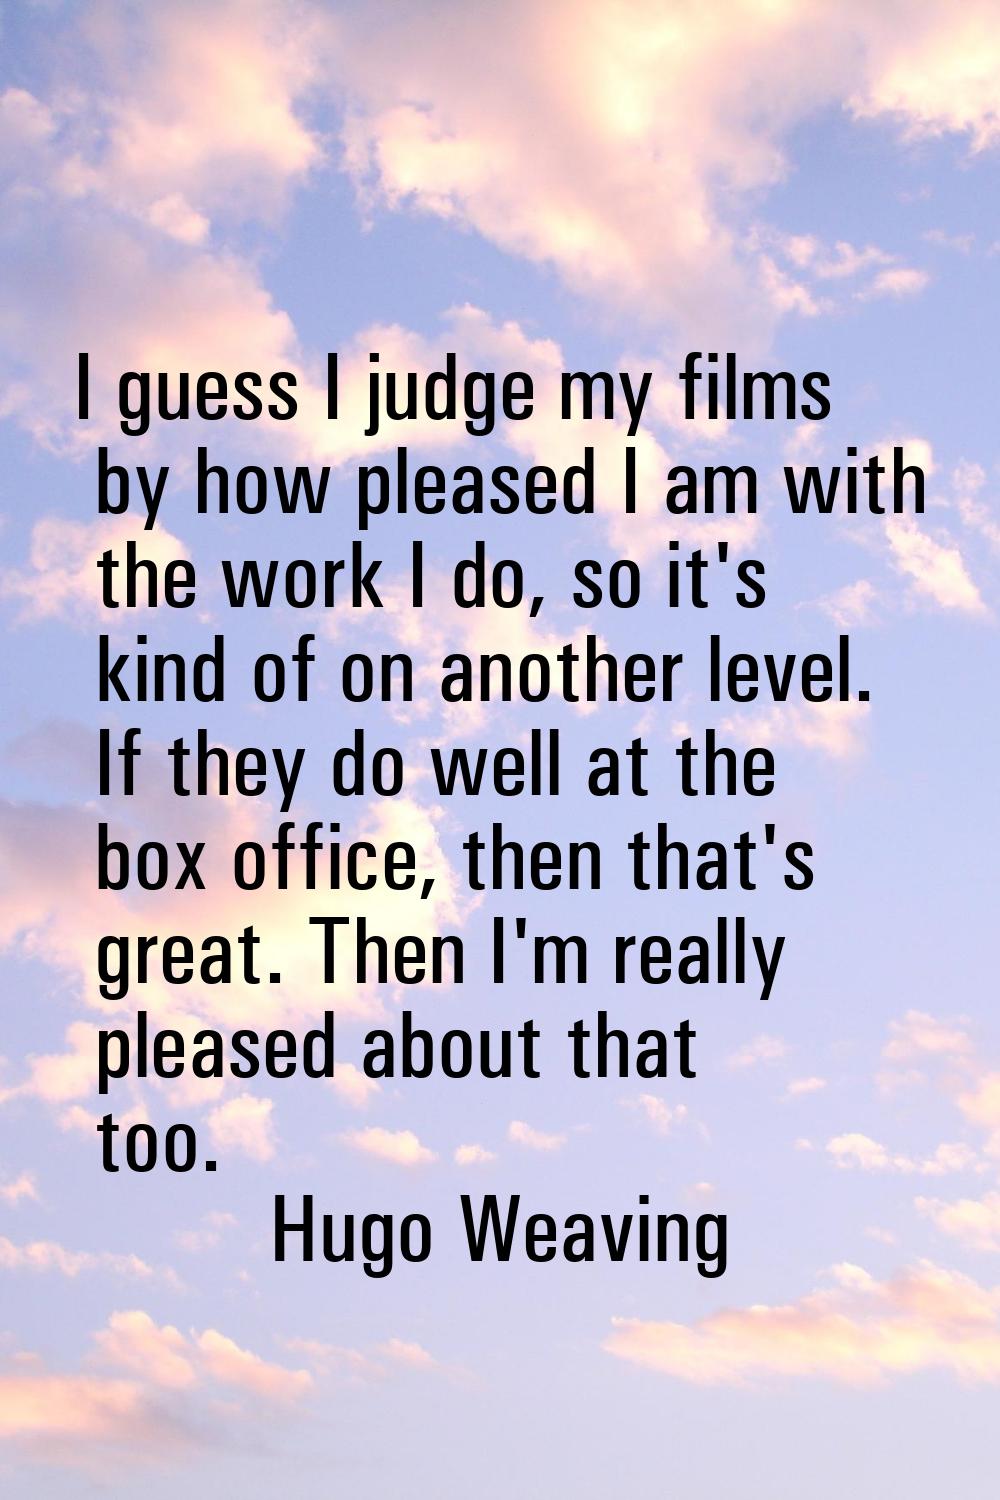 I guess I judge my films by how pleased I am with the work I do, so it's kind of on another level. 